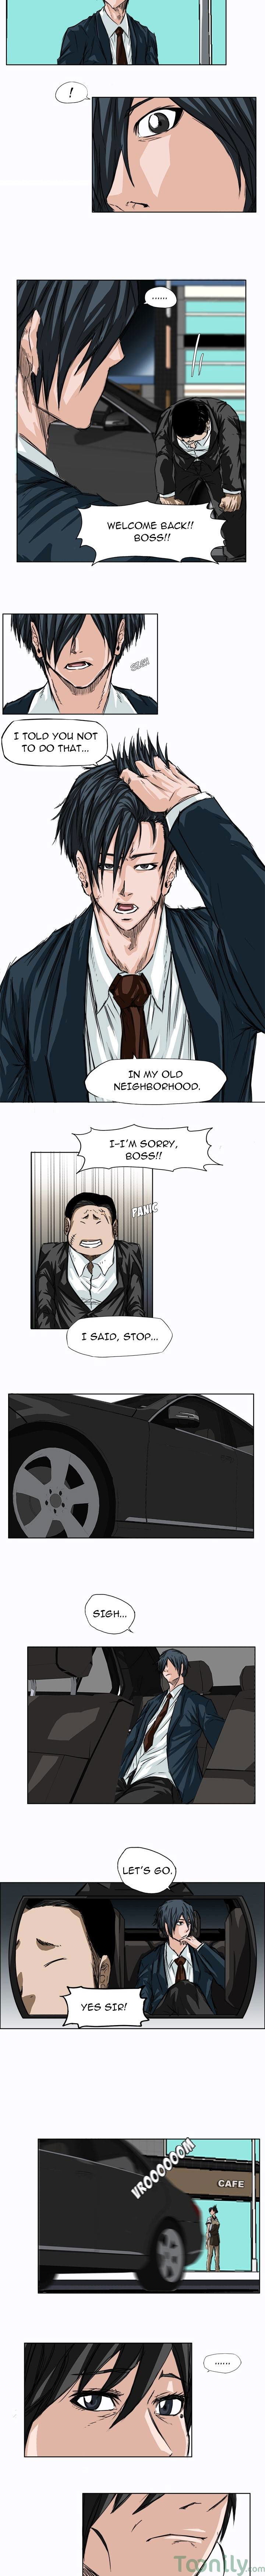 Boss in School Chapter 6 page 2